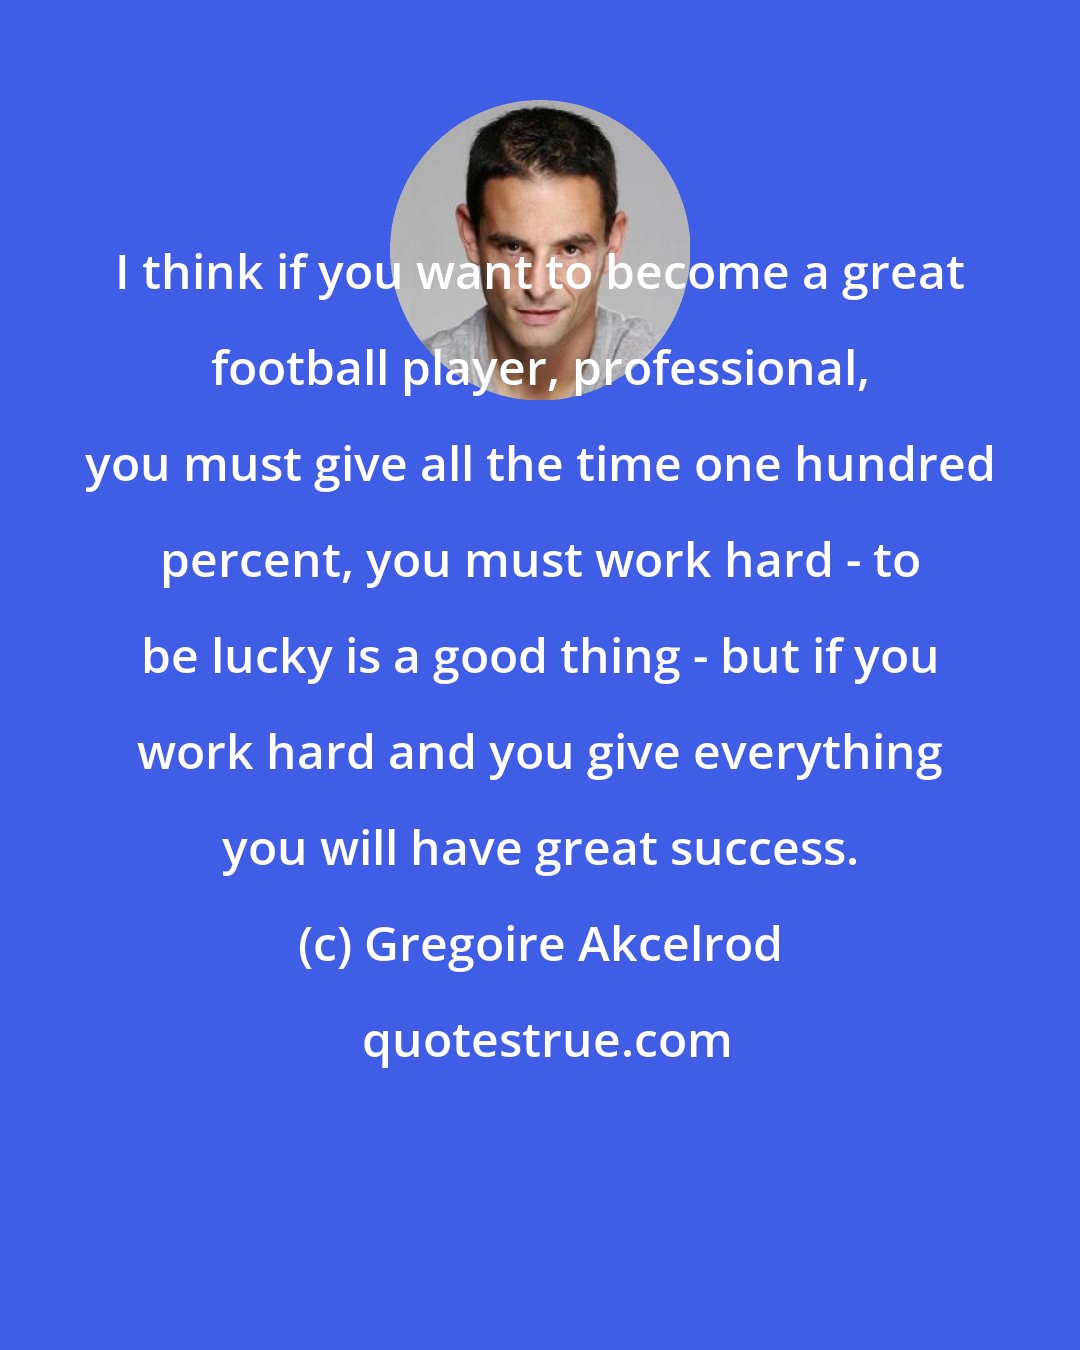 Gregoire Akcelrod: I think if you want to become a great football player, professional, you must give all the time one hundred percent, you must work hard - to be lucky is a good thing - but if you work hard and you give everything you will have great success.